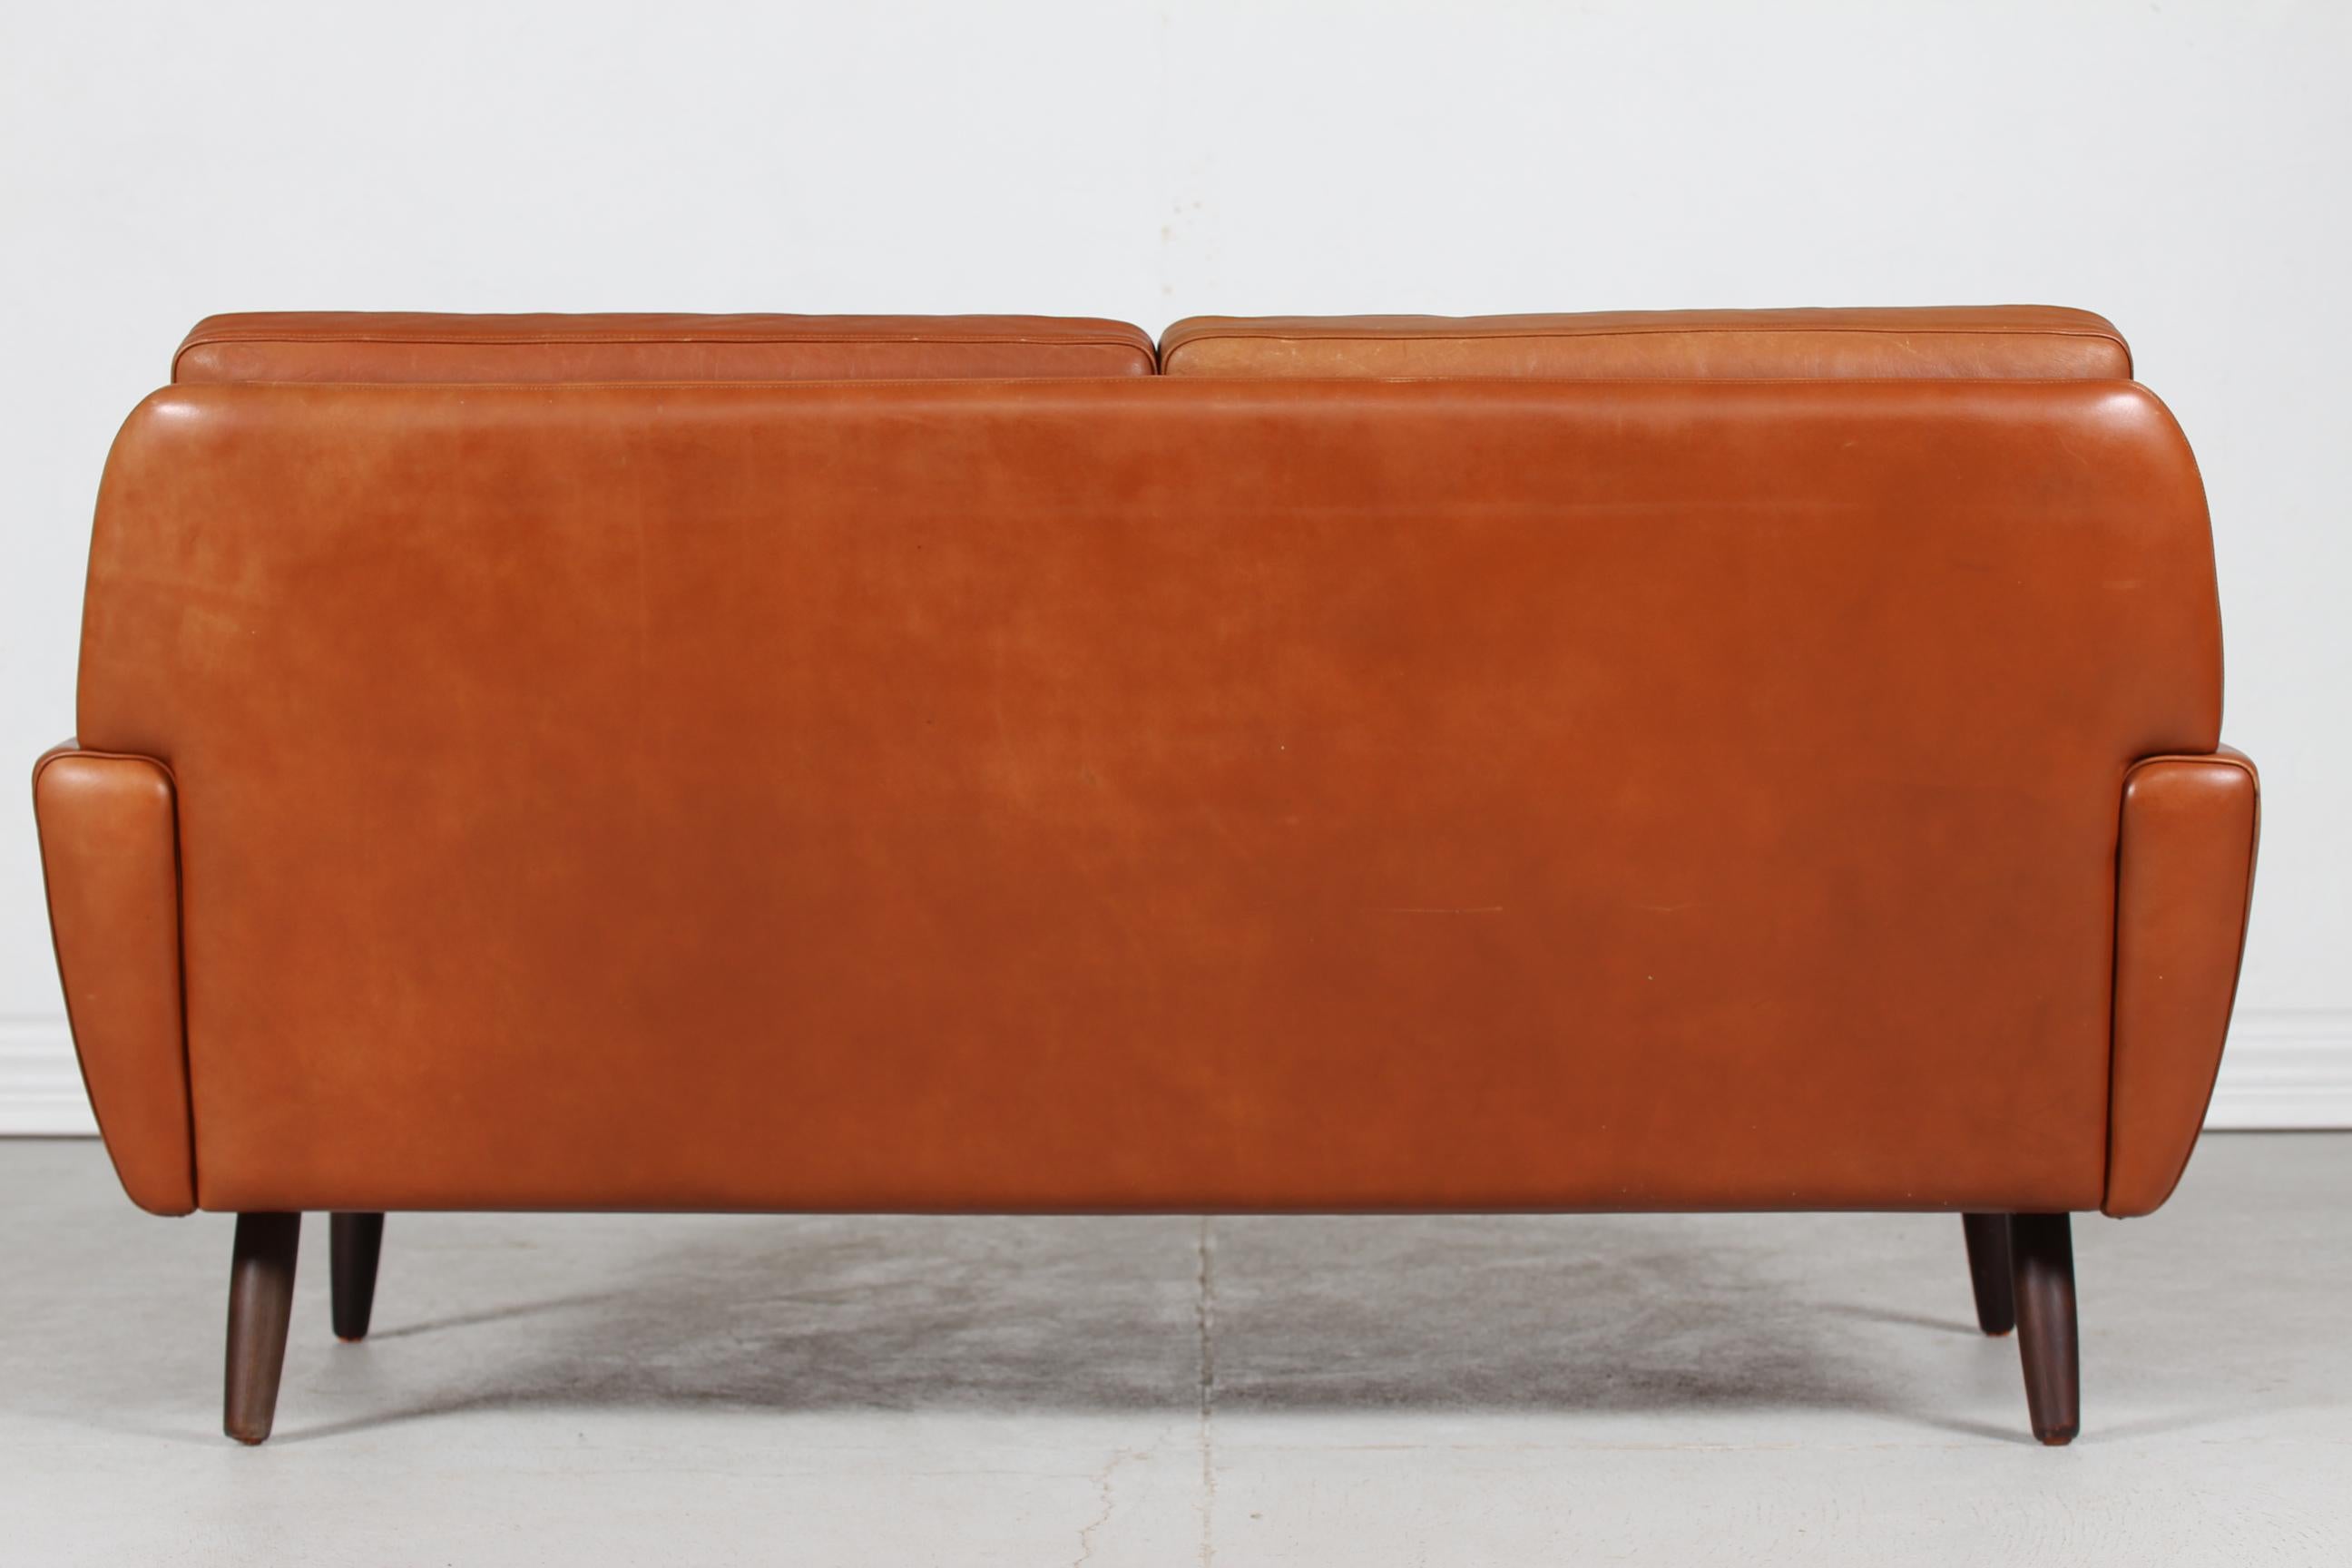 Mid-20th Century Danish Modern Two-Seat Sofa with Cognac-Colored Leather Made in Denmark 1960s For Sale